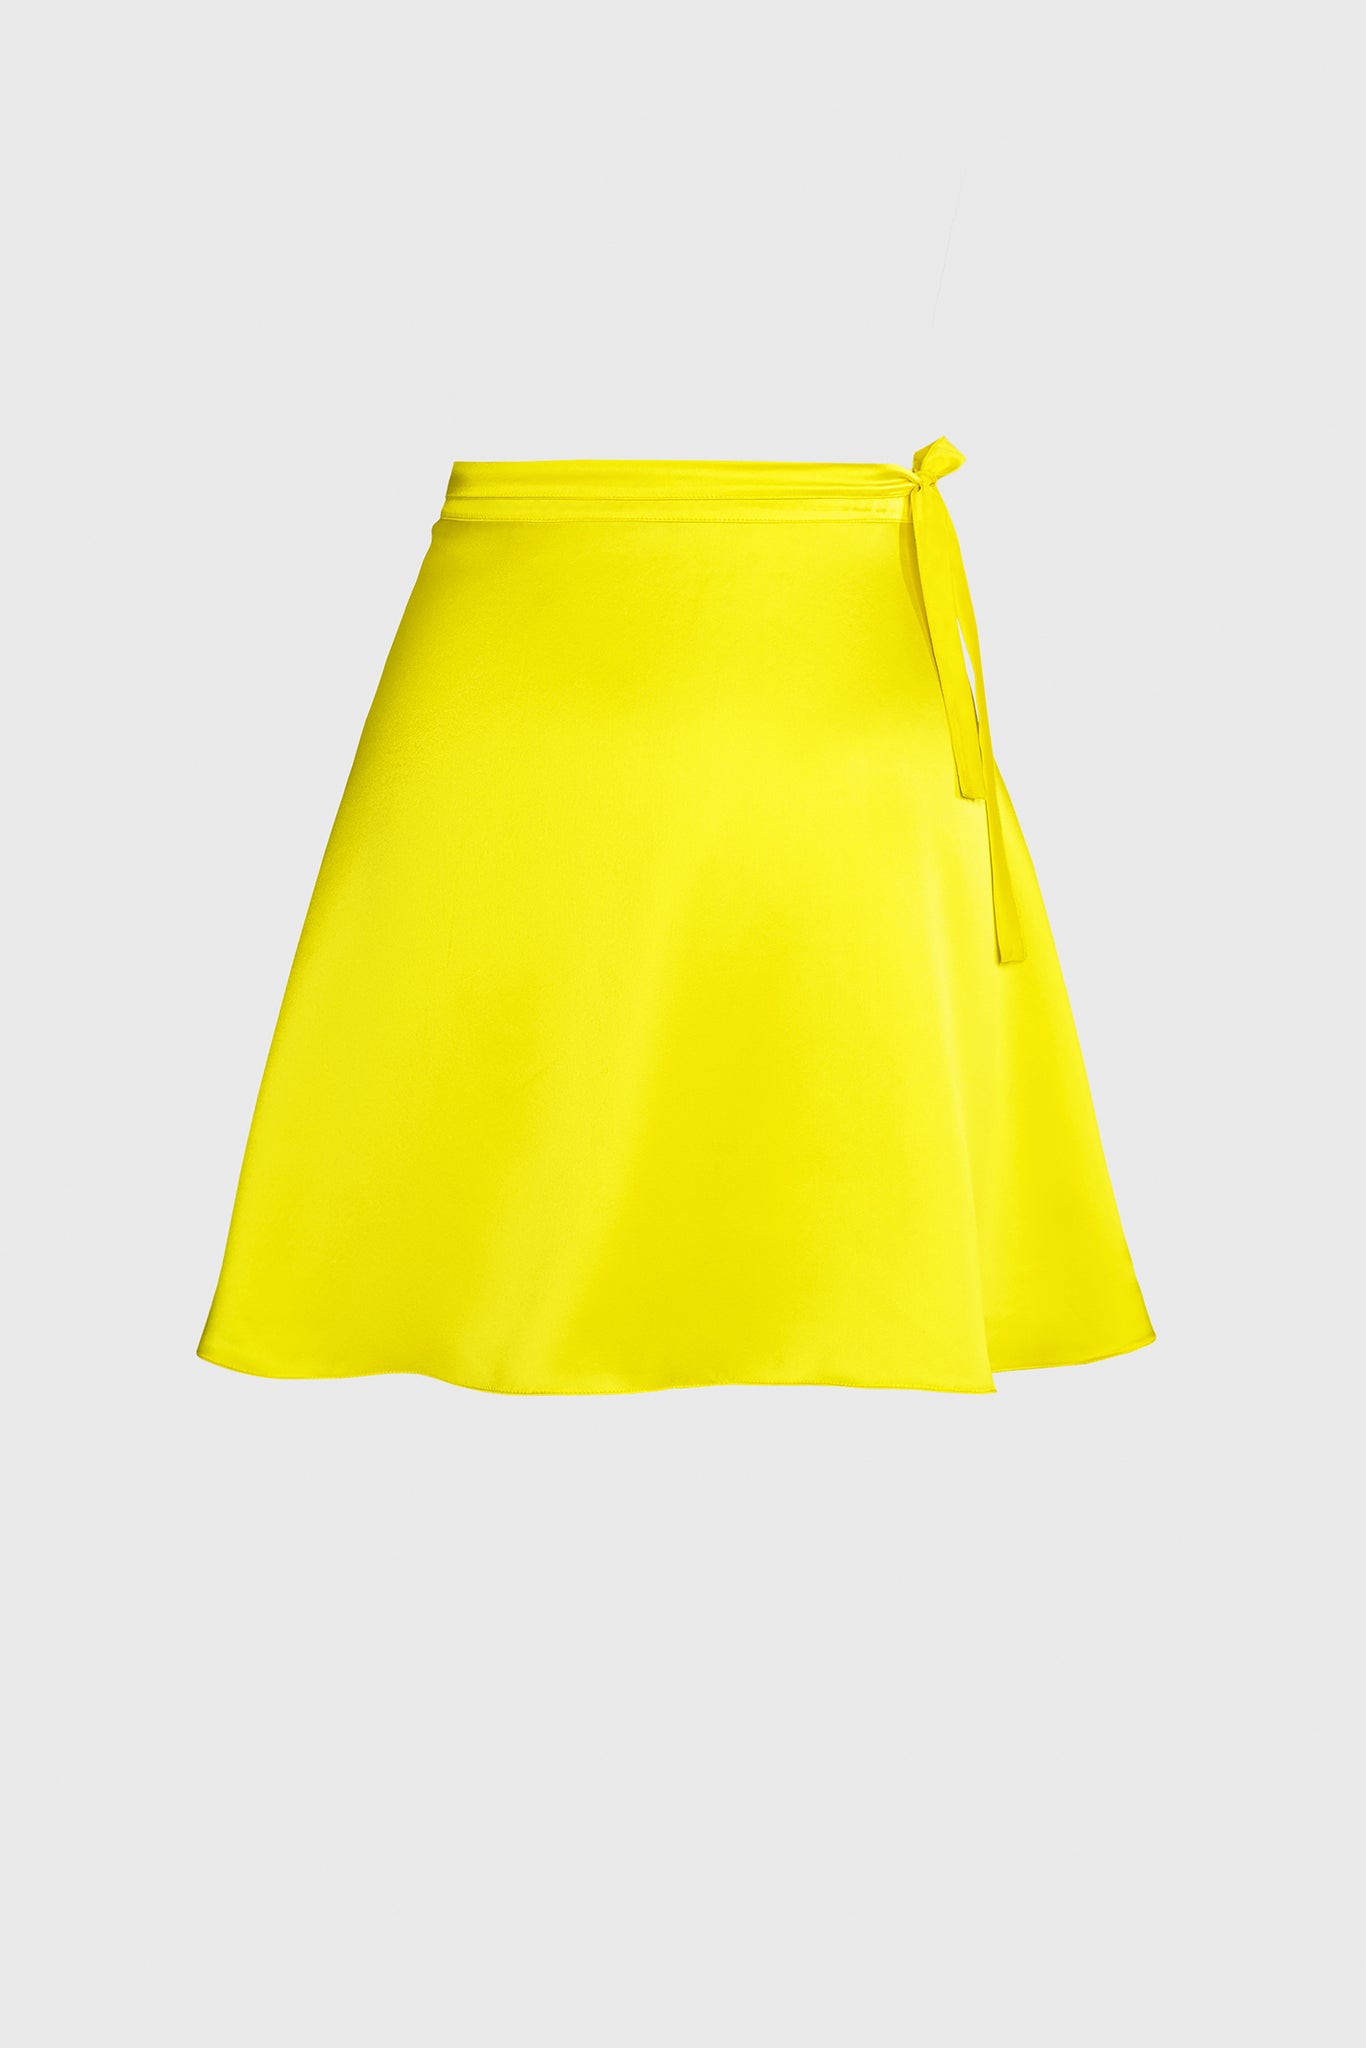 Ruxandra designed dancer skirt, circular cut skirt, bias cut for drapes and folds, midi cut a line tapered wrap skirt, matching with your hair color or eyes, sophisticated and multi purpose use, real Italian silk, shiny and silky